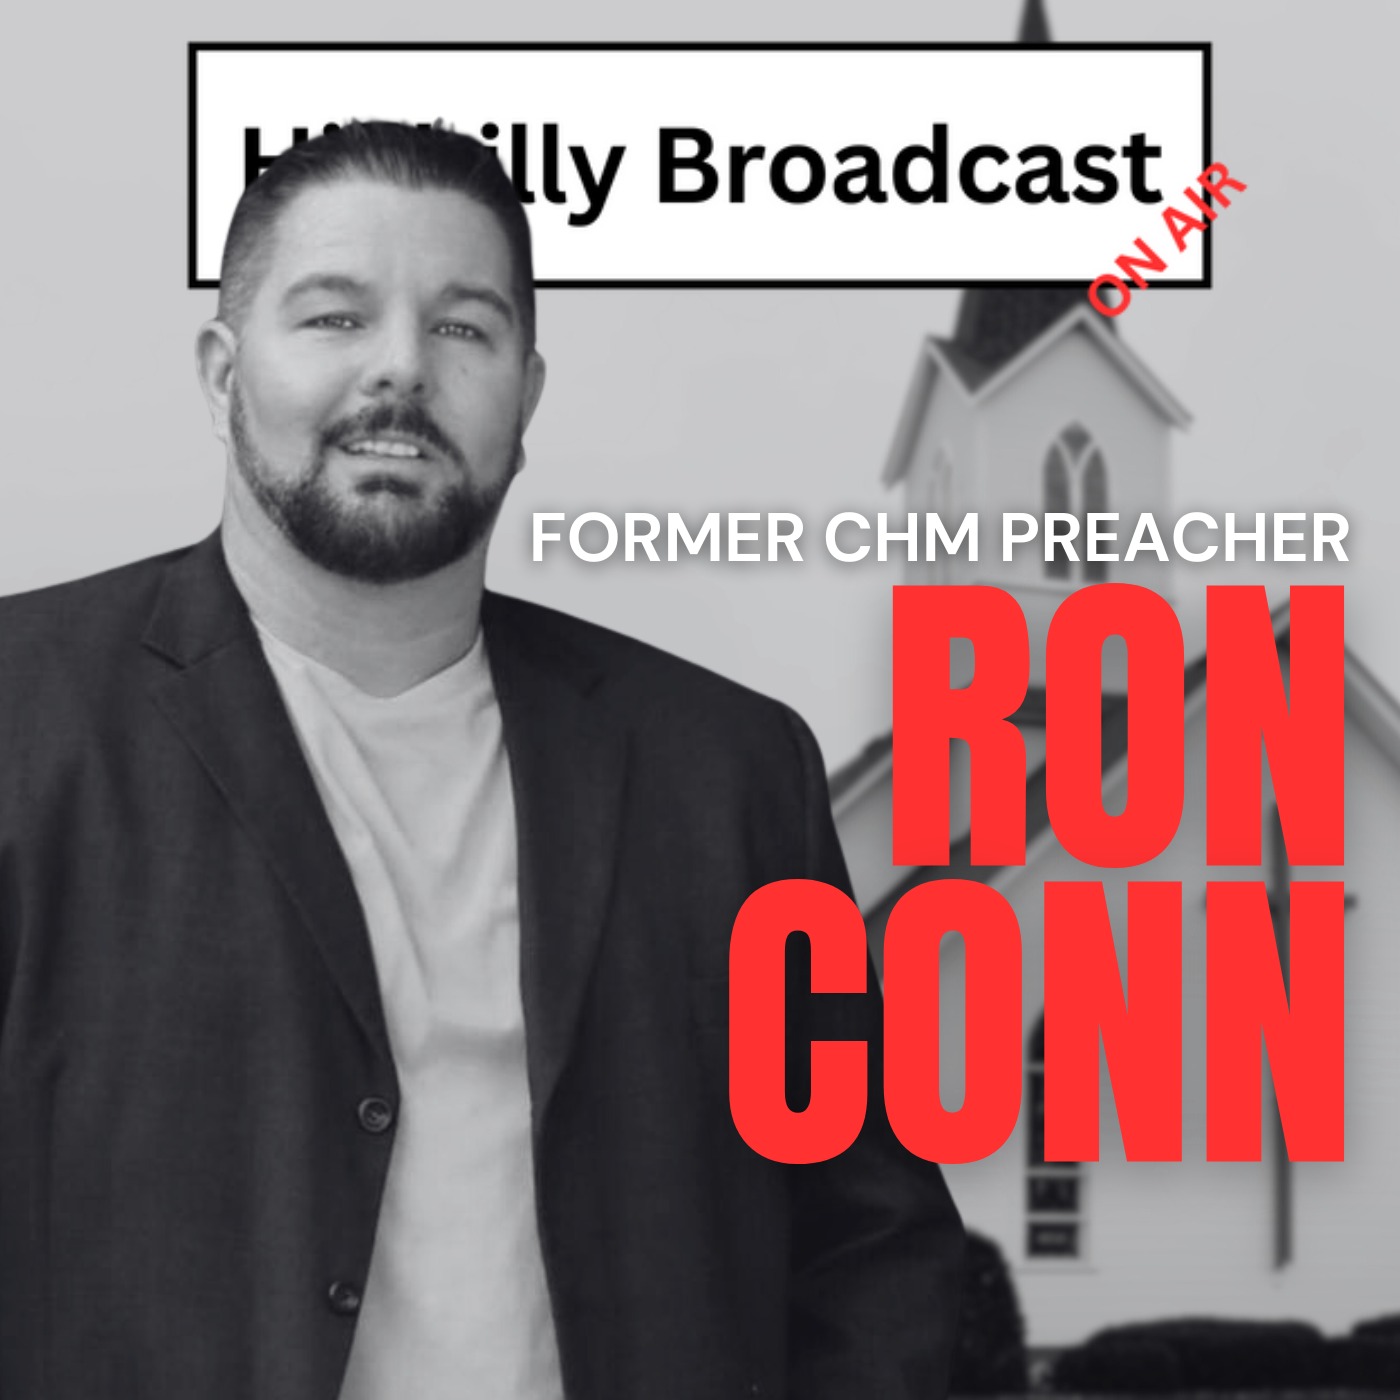 Ron Conn: Former CHM Preacher Speaks Out About Abuse